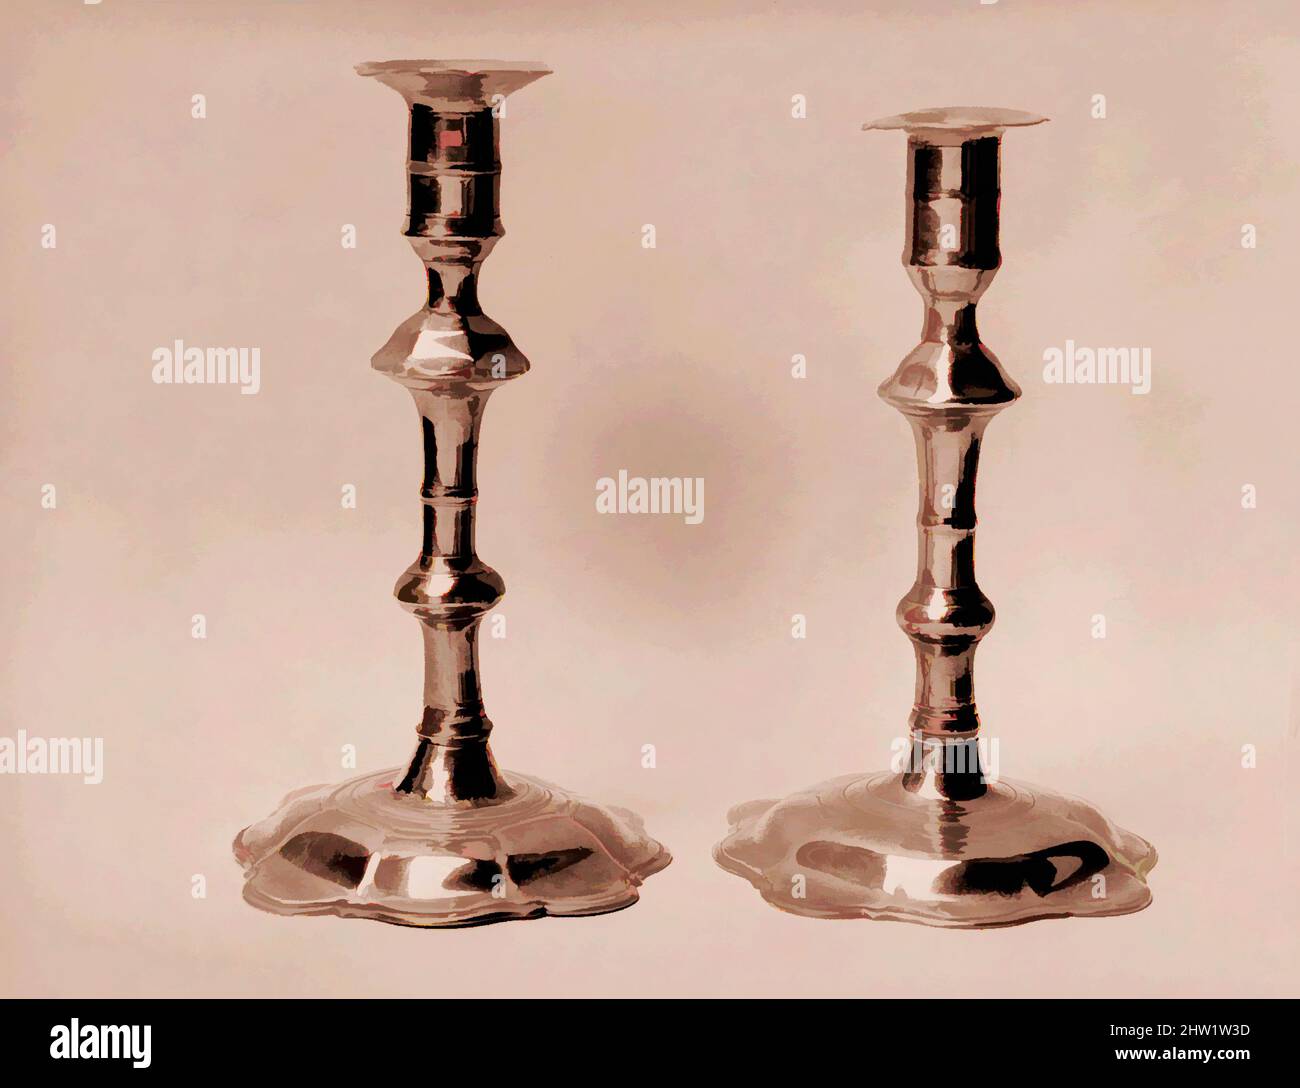 Art inspired by Candlestick, 1740–70, Probably made in England, Brass, H. 8 in. (20.3 cm), Metal, Classic works modernized by Artotop with a splash of modernity. Shapes, color and value, eye-catching visual impact on art. Emotions through freedom of artworks in a contemporary way. A timeless message pursuing a wildly creative new direction. Artists turning to the digital medium and creating the Artotop NFT Stock Photo